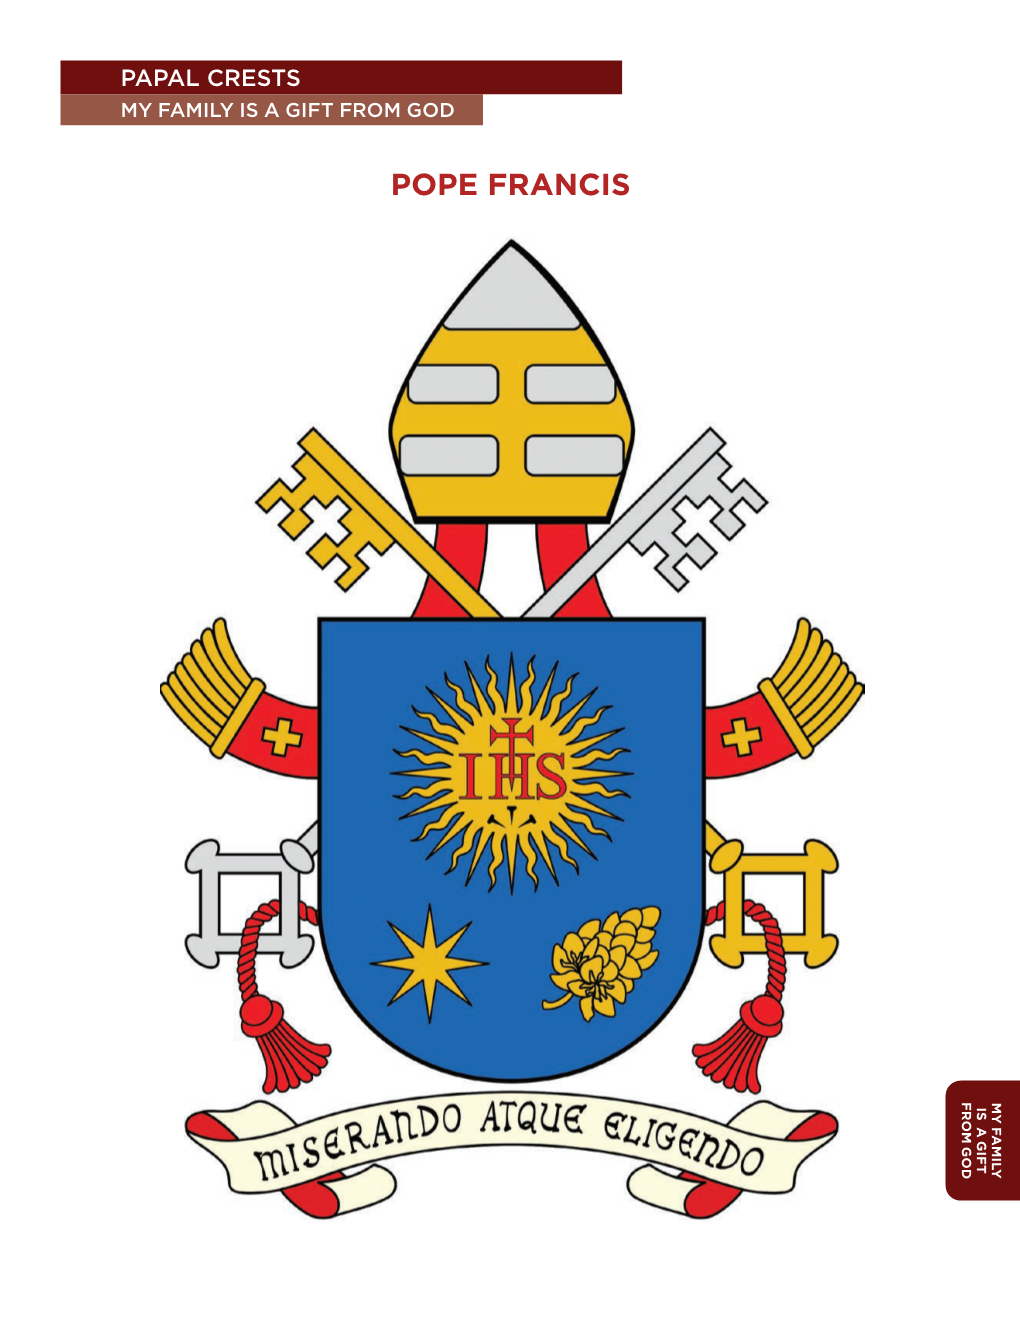 Pope Francis Pope My Family Is a Gift God from My Family Papal Crests Papal